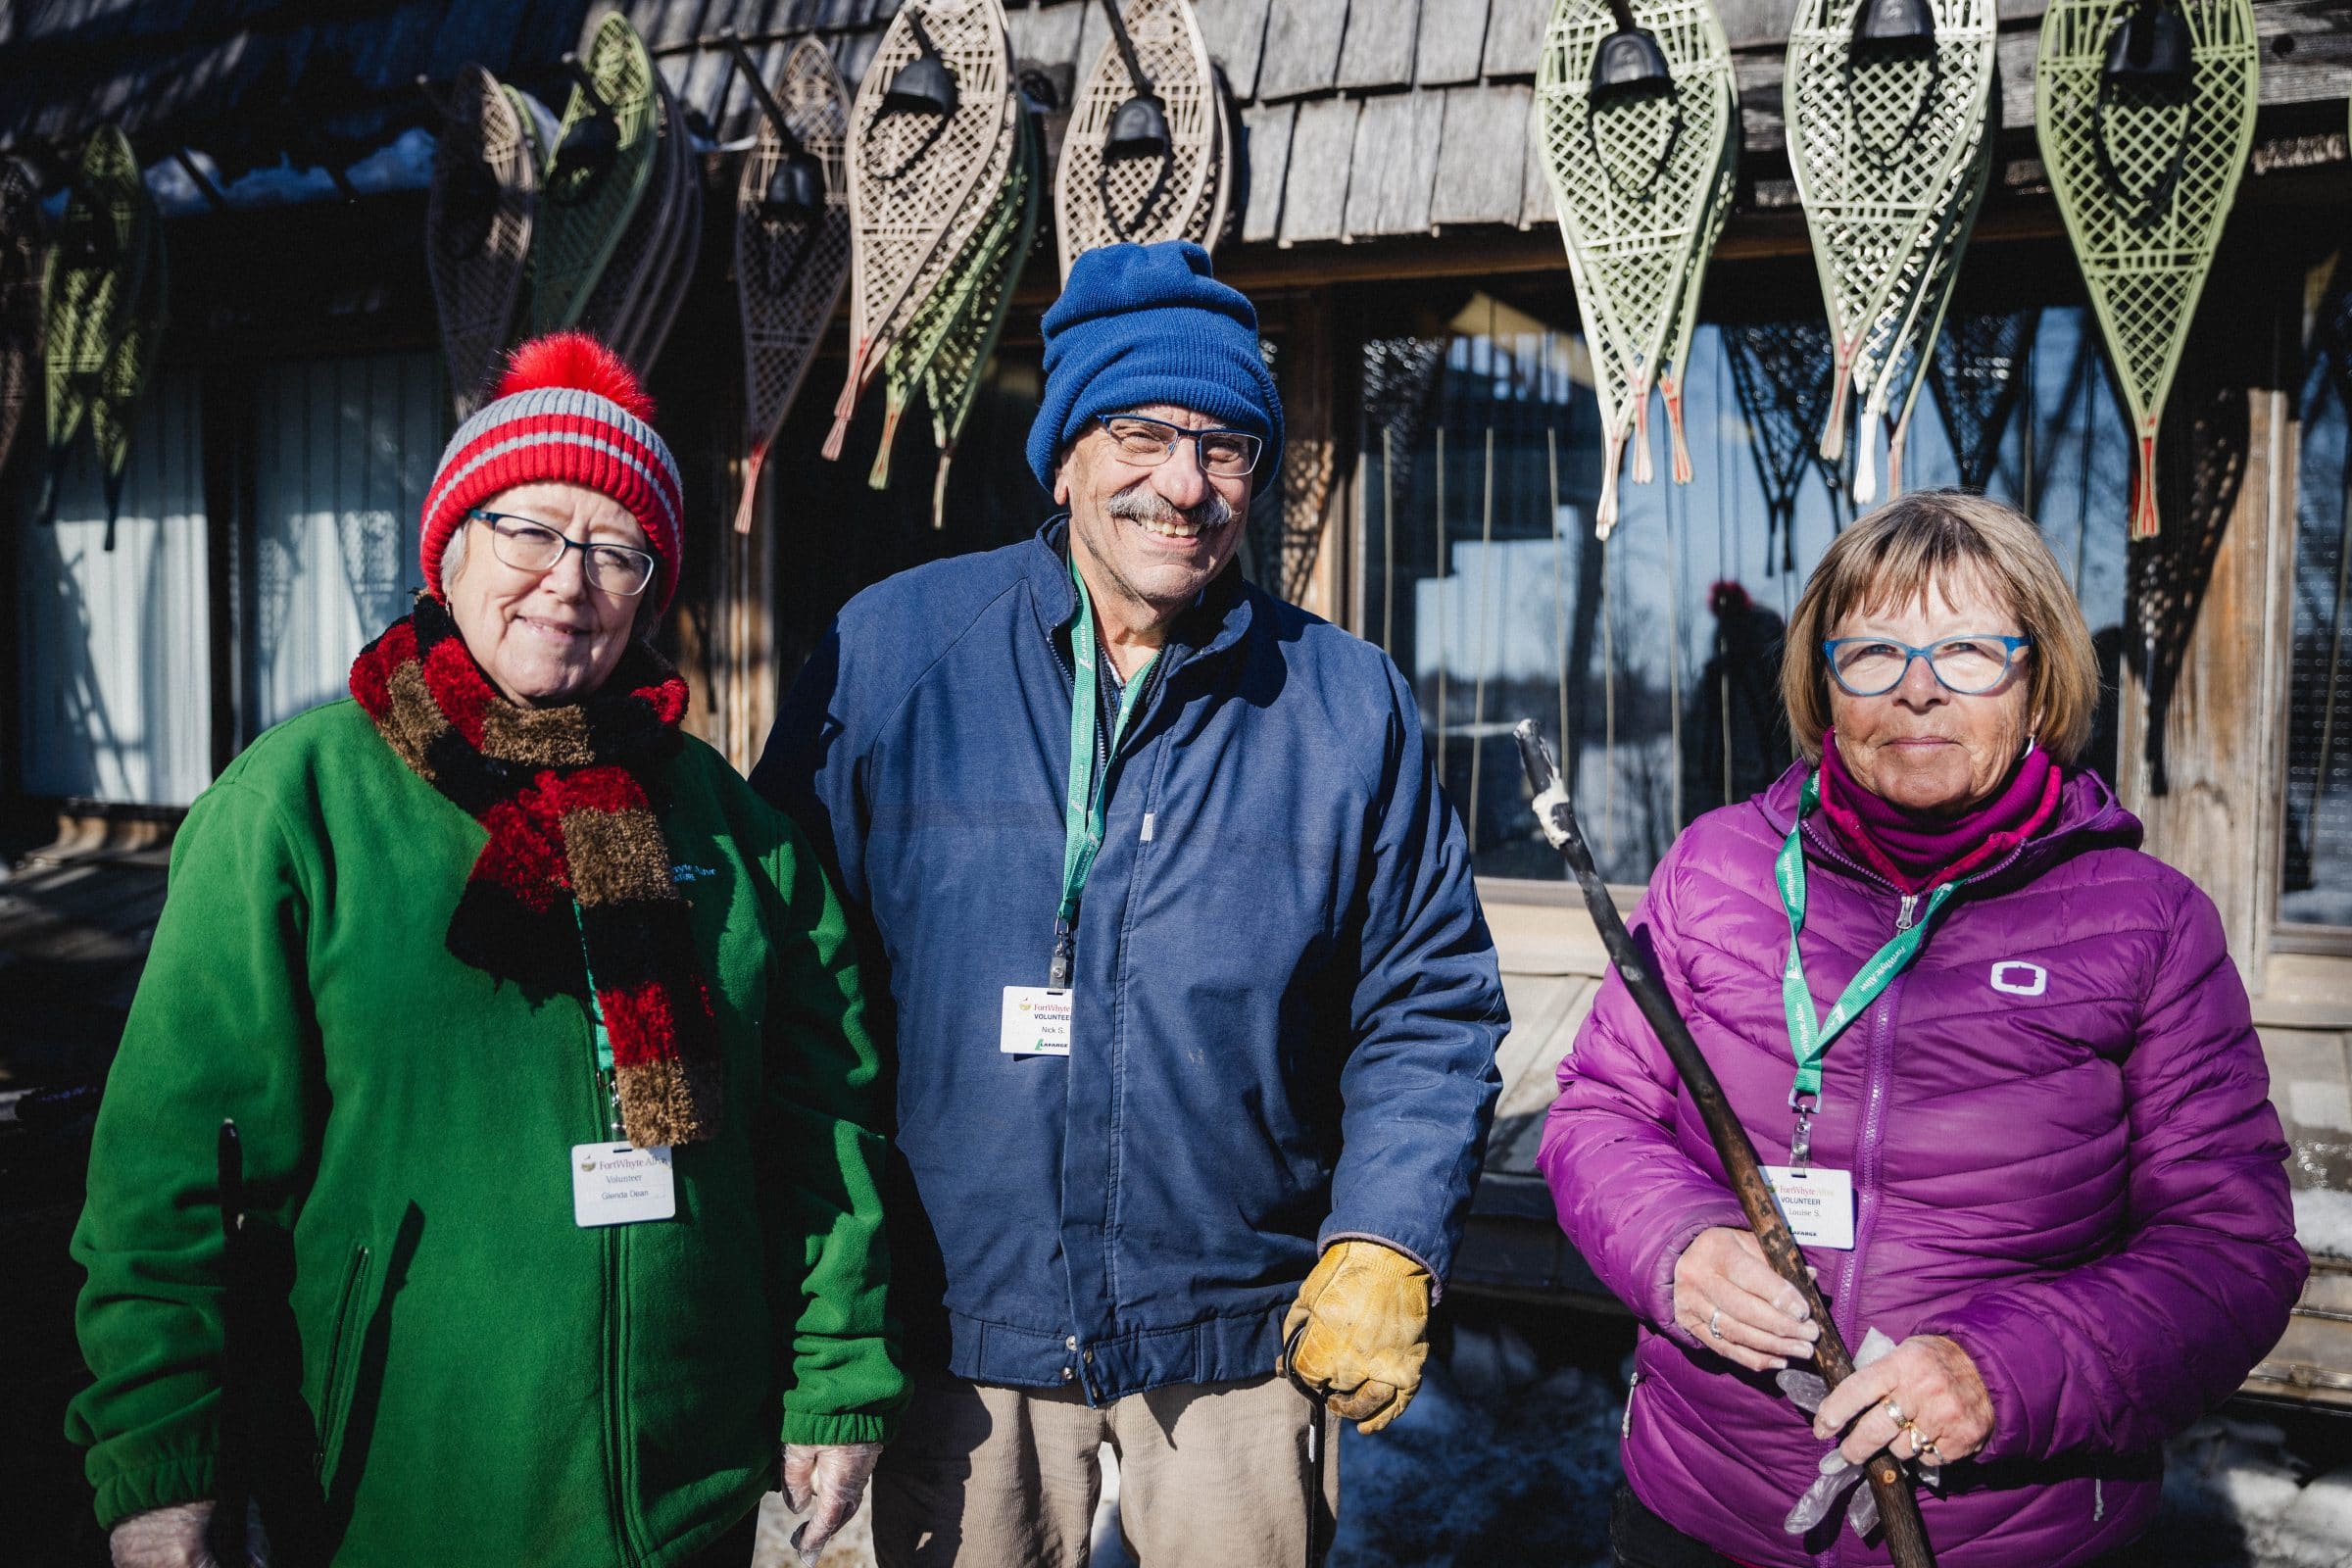 Three adults smile at the camera. They wear lanyards that indicate they are volunteers.